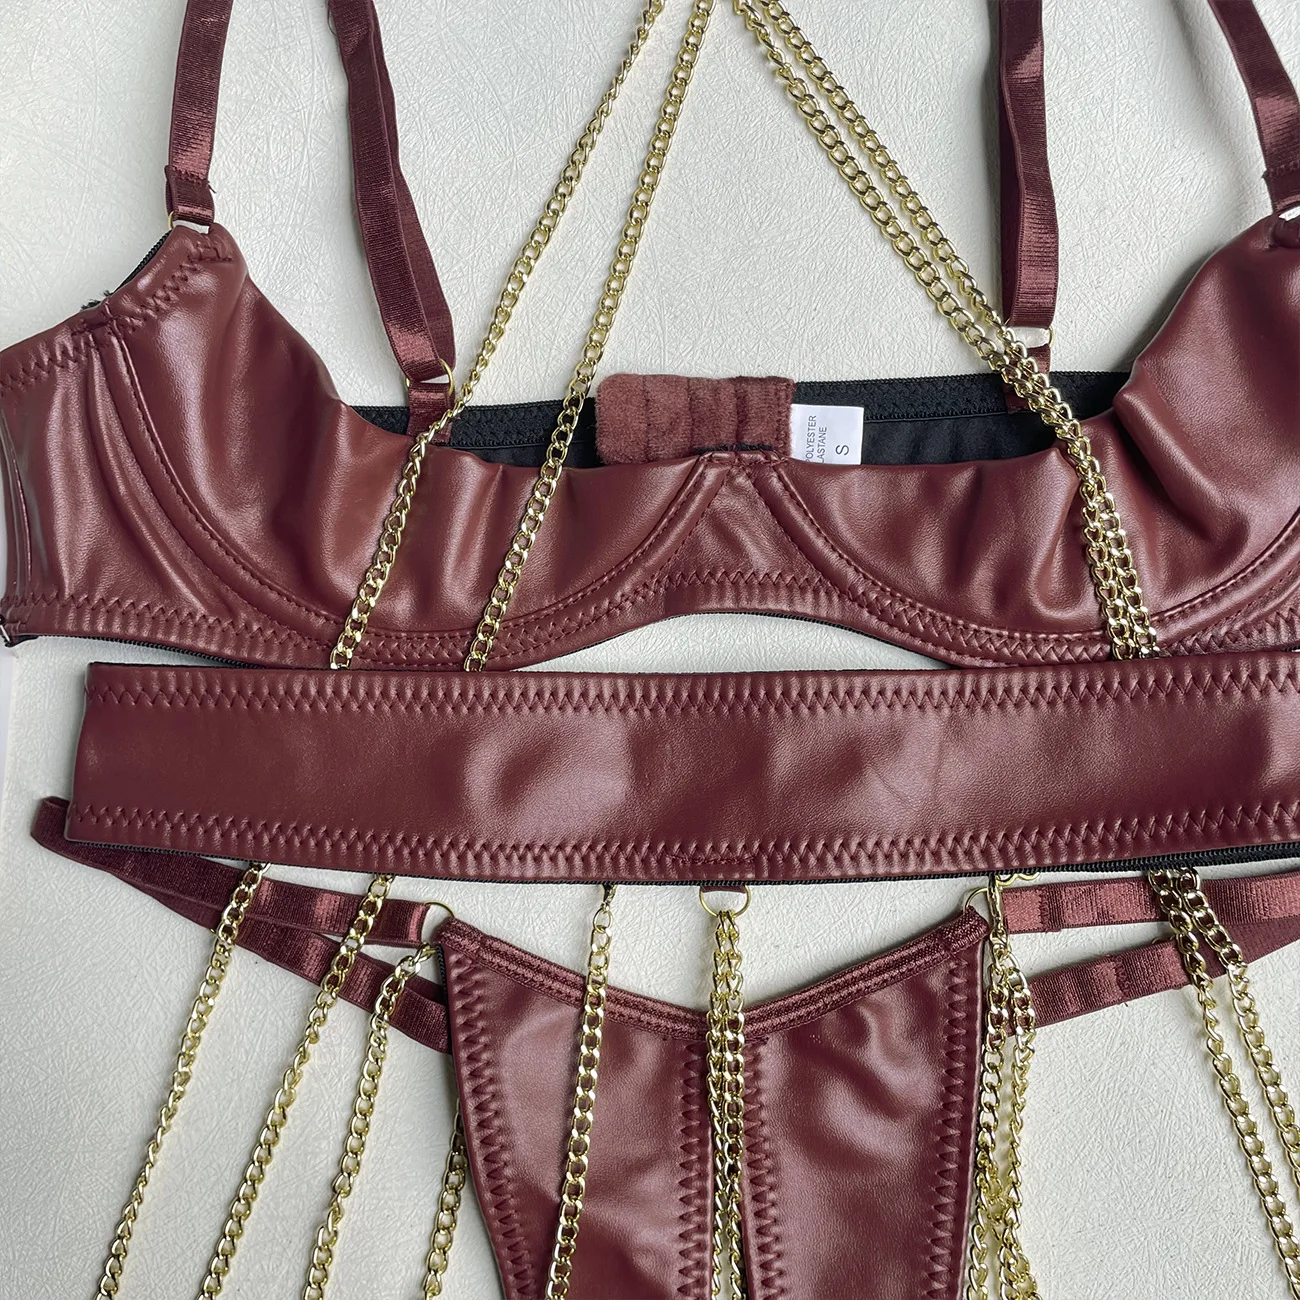 Lust - Crotchless & Half Cups Leather Lingerie